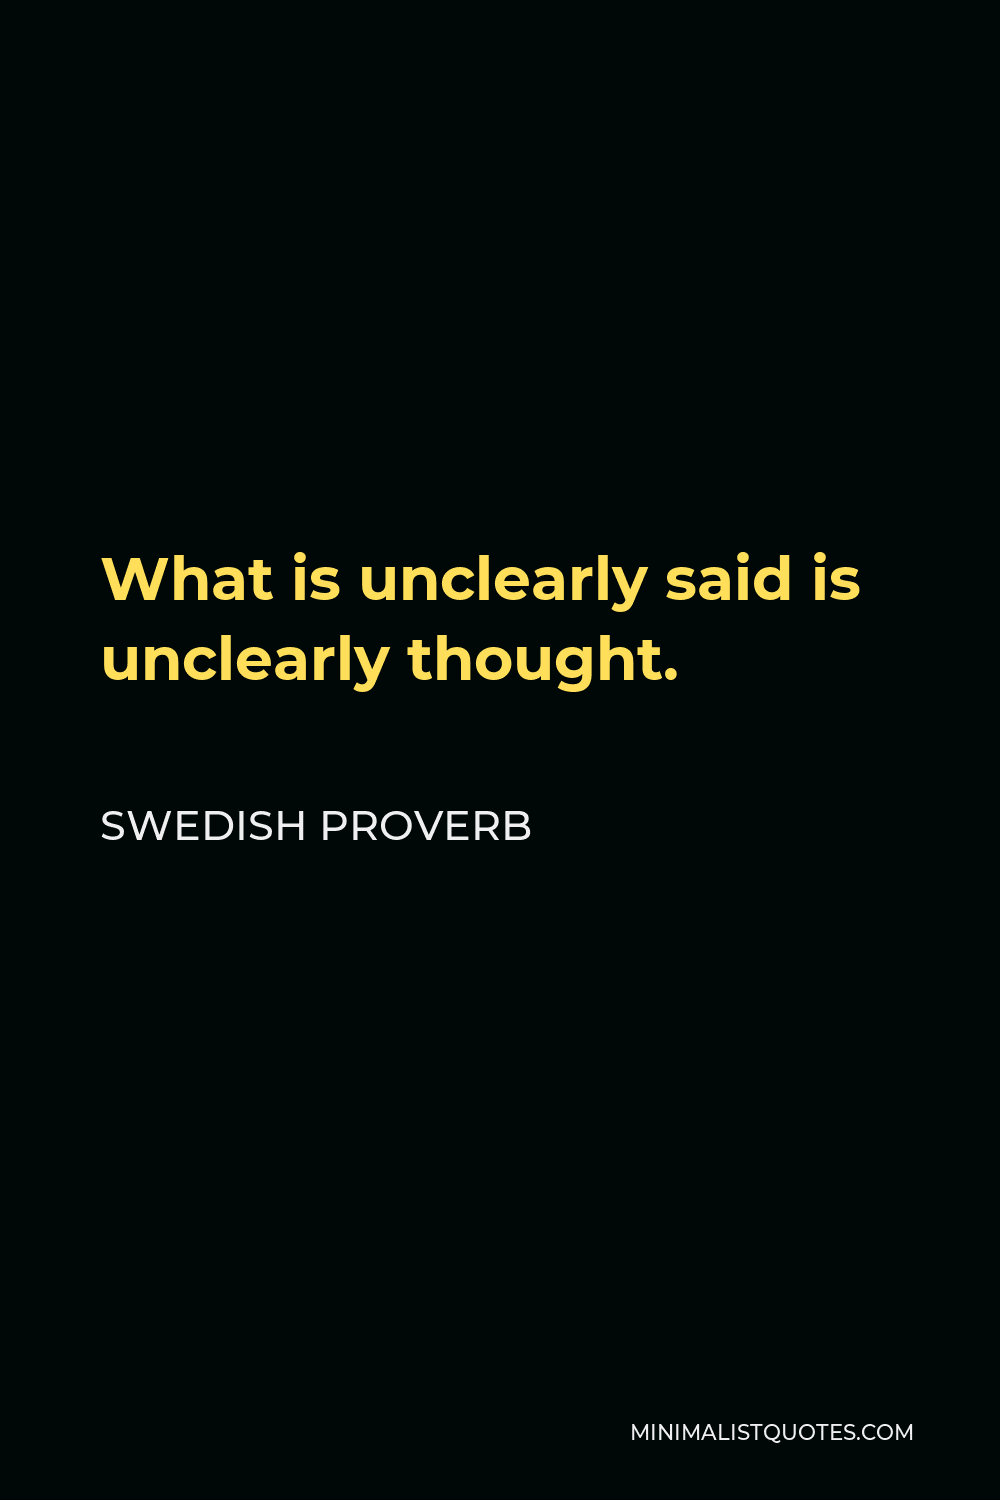 Swedish Proverb Quote - What is unclearly said is unclearly thought.